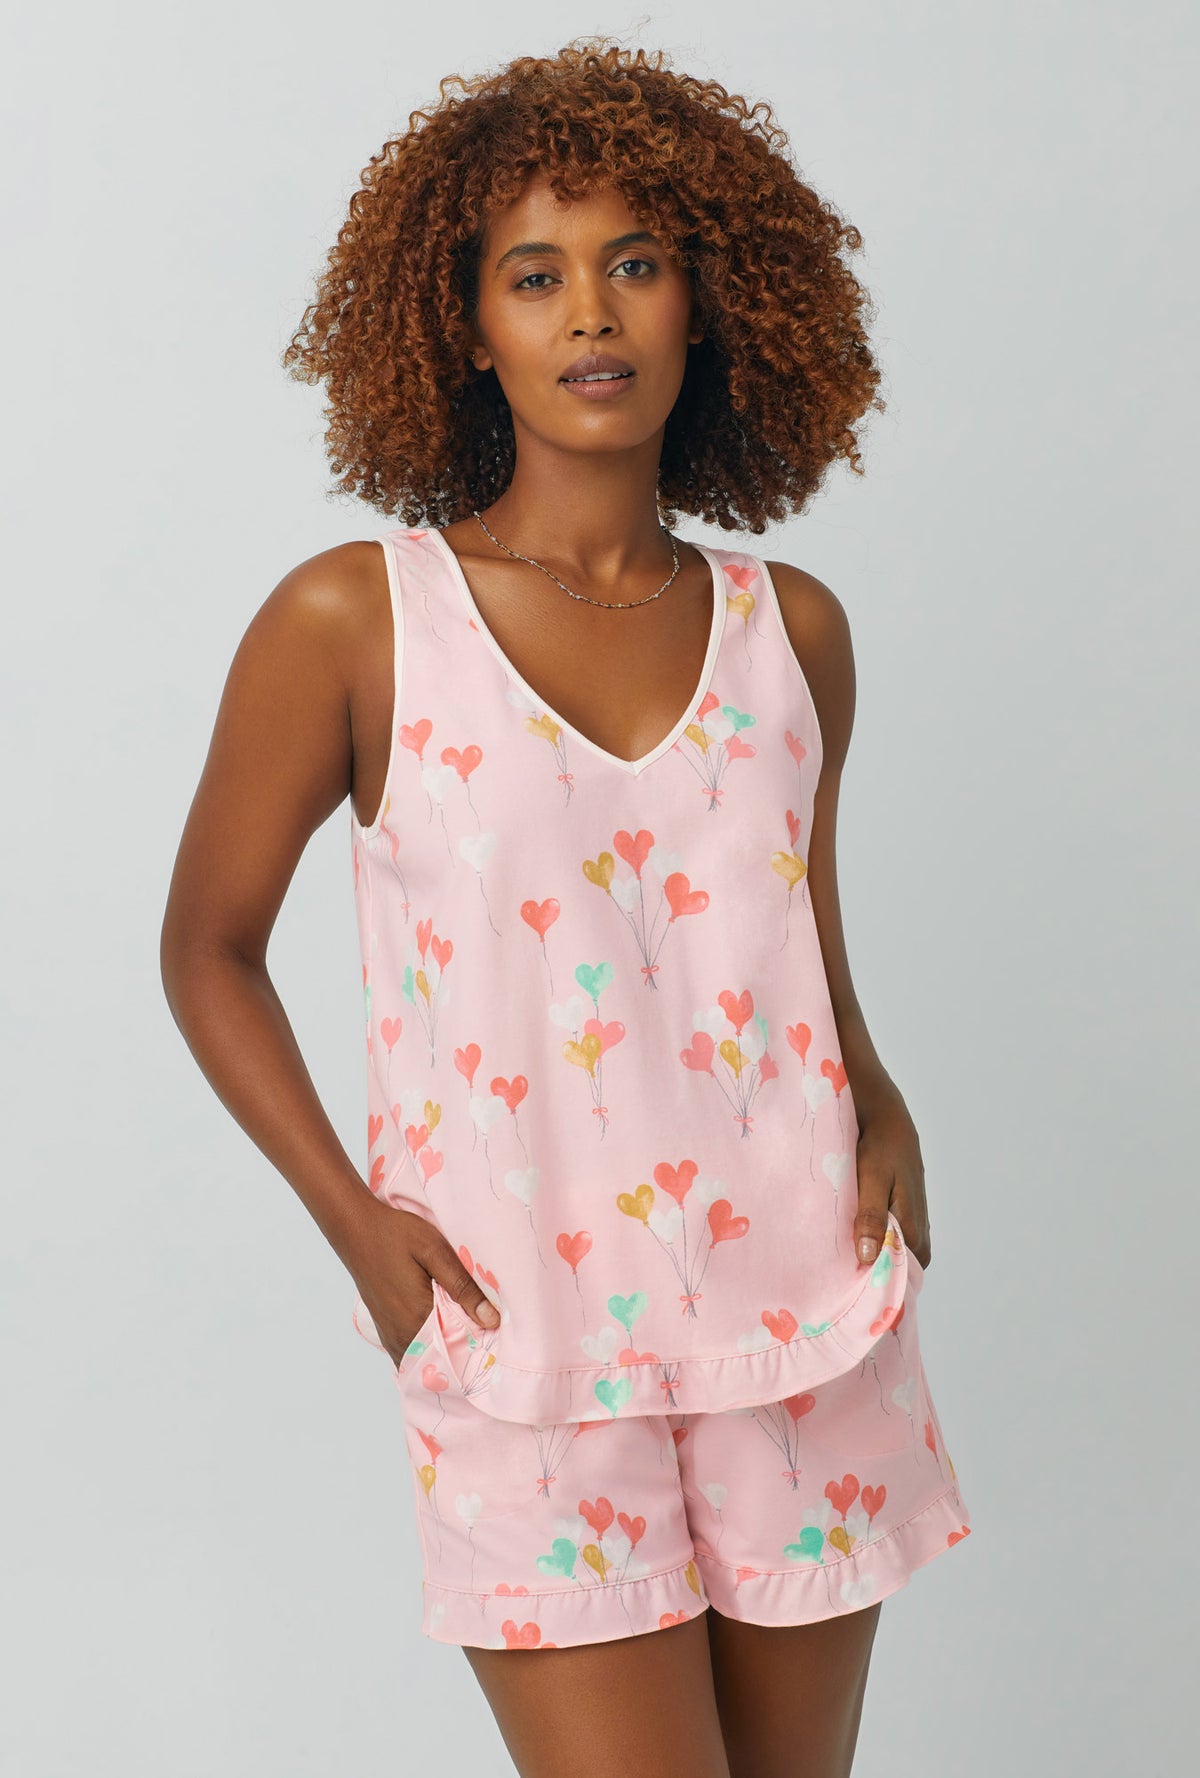 A lady wearing Tank Shorty Stretch Jersey PJ Set with Floating Hearts Ruffle print